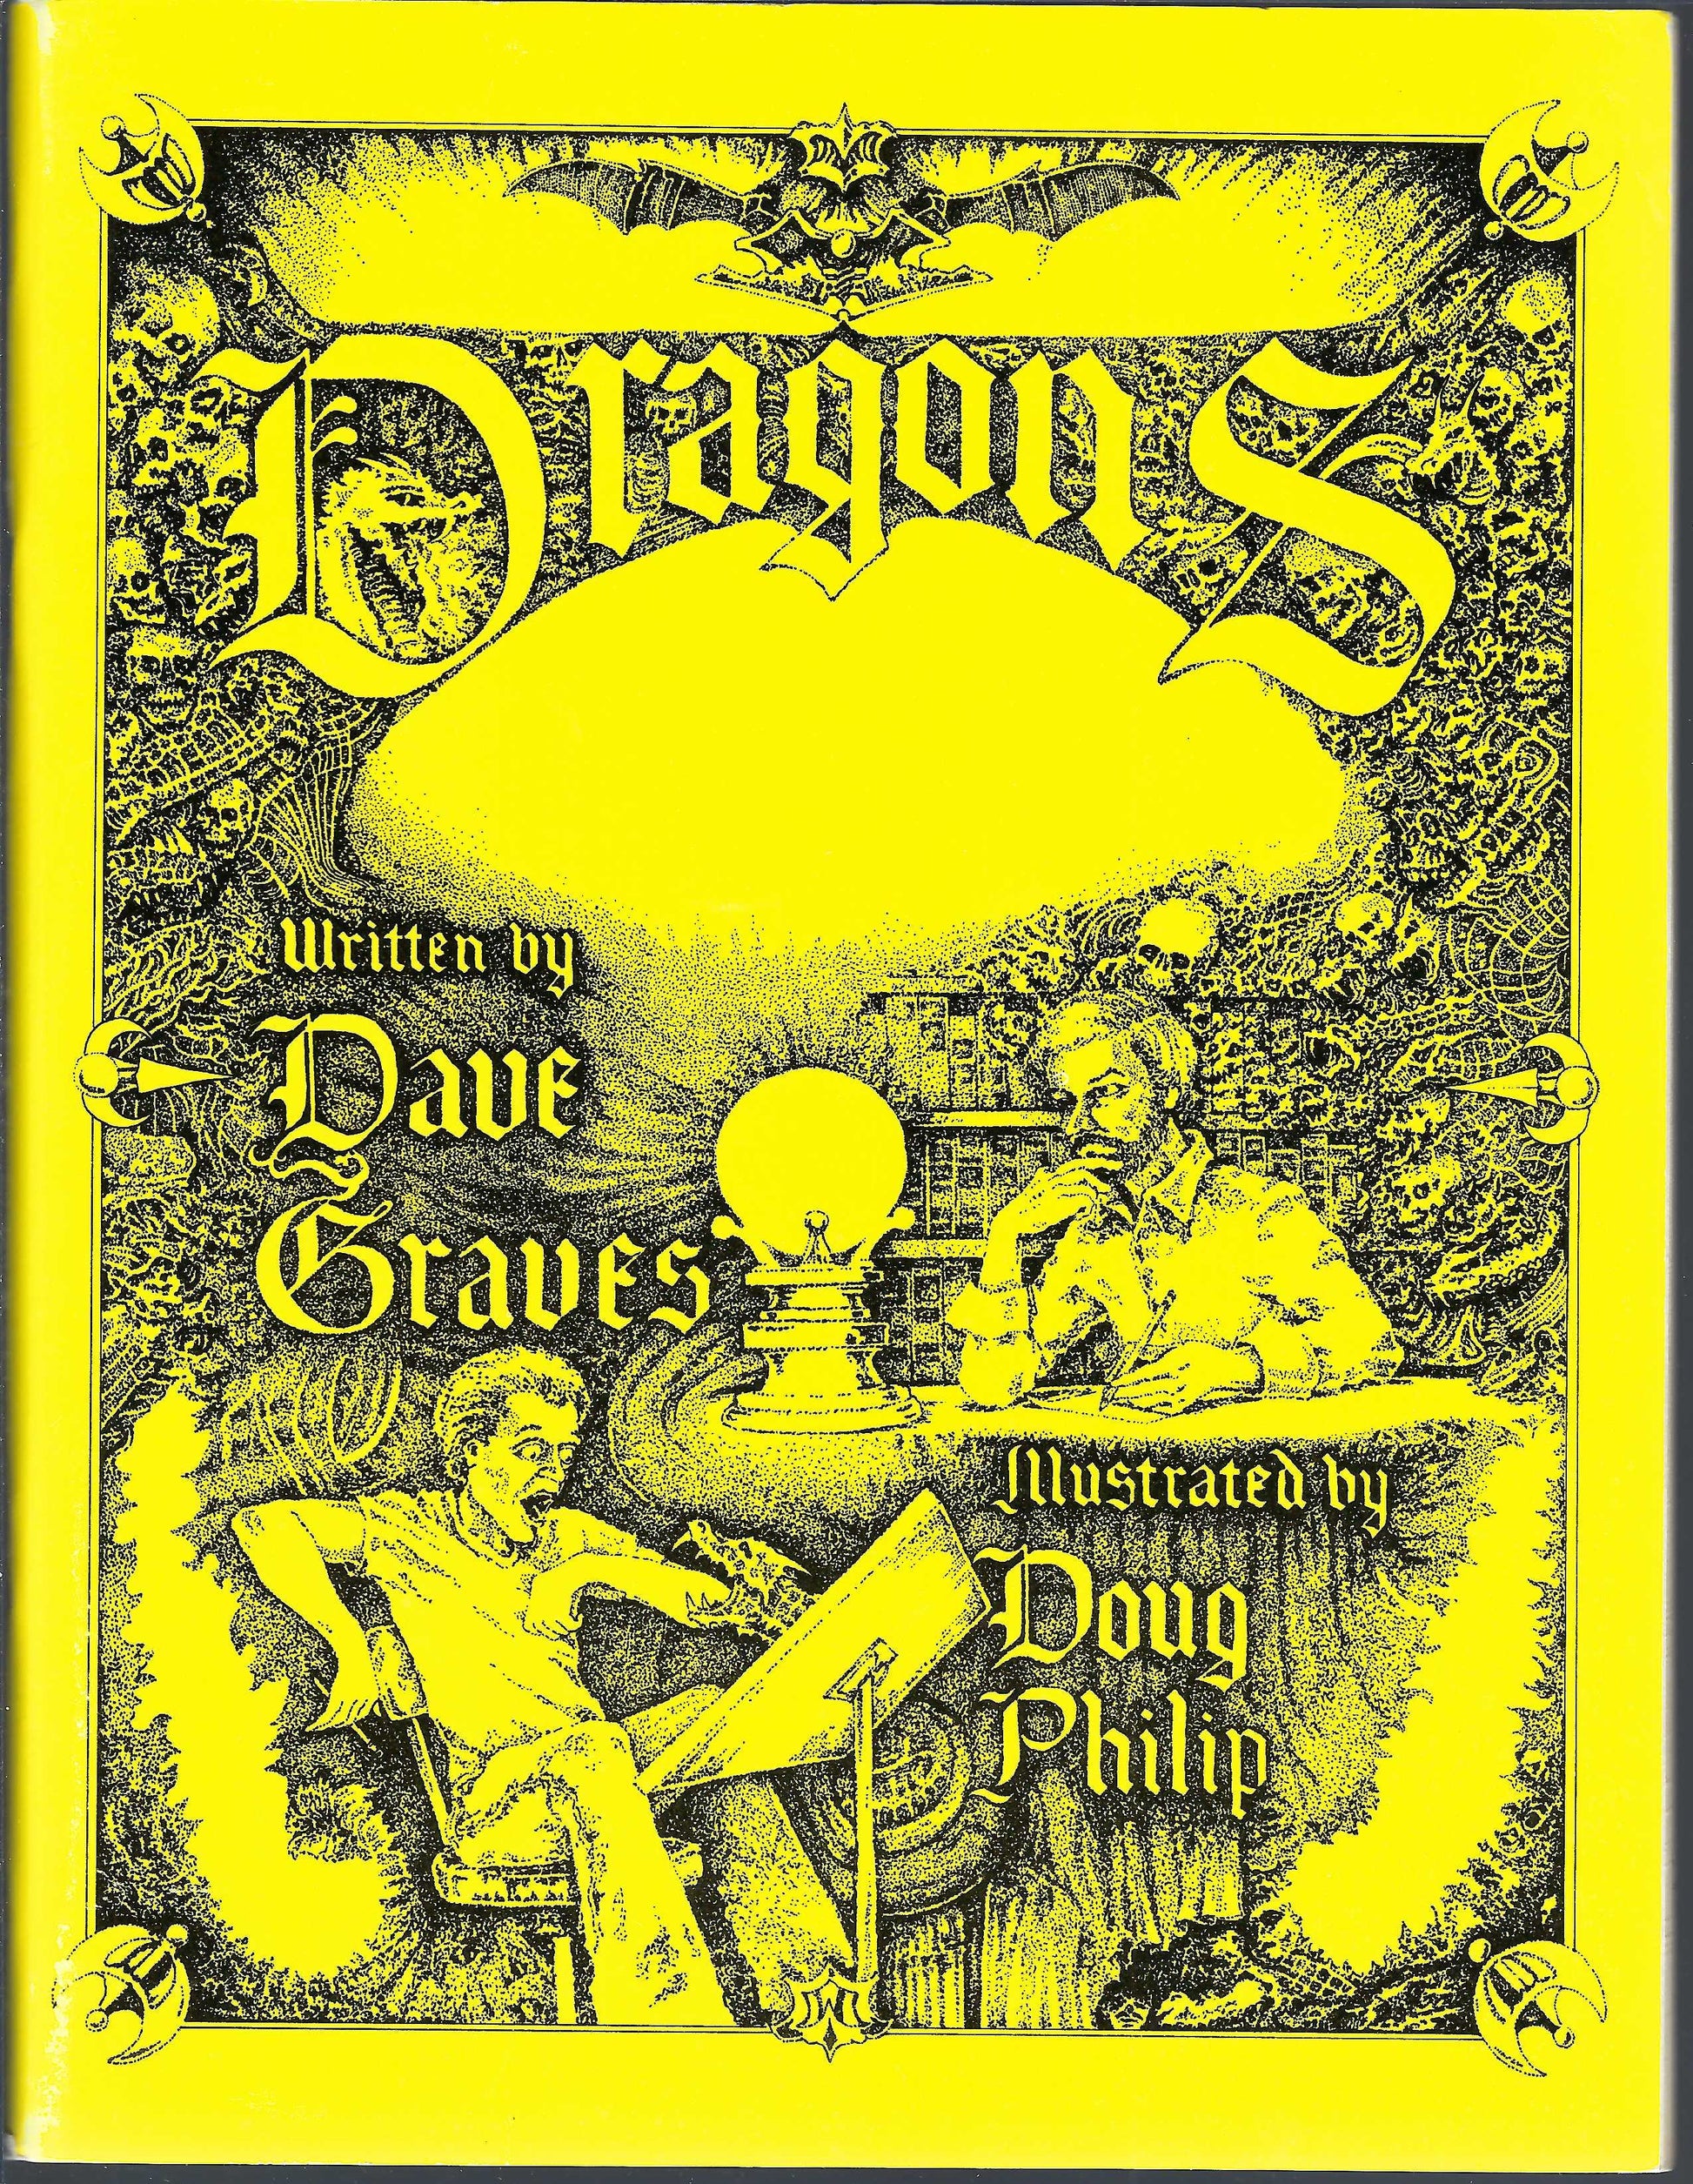 Dragons front cover of book